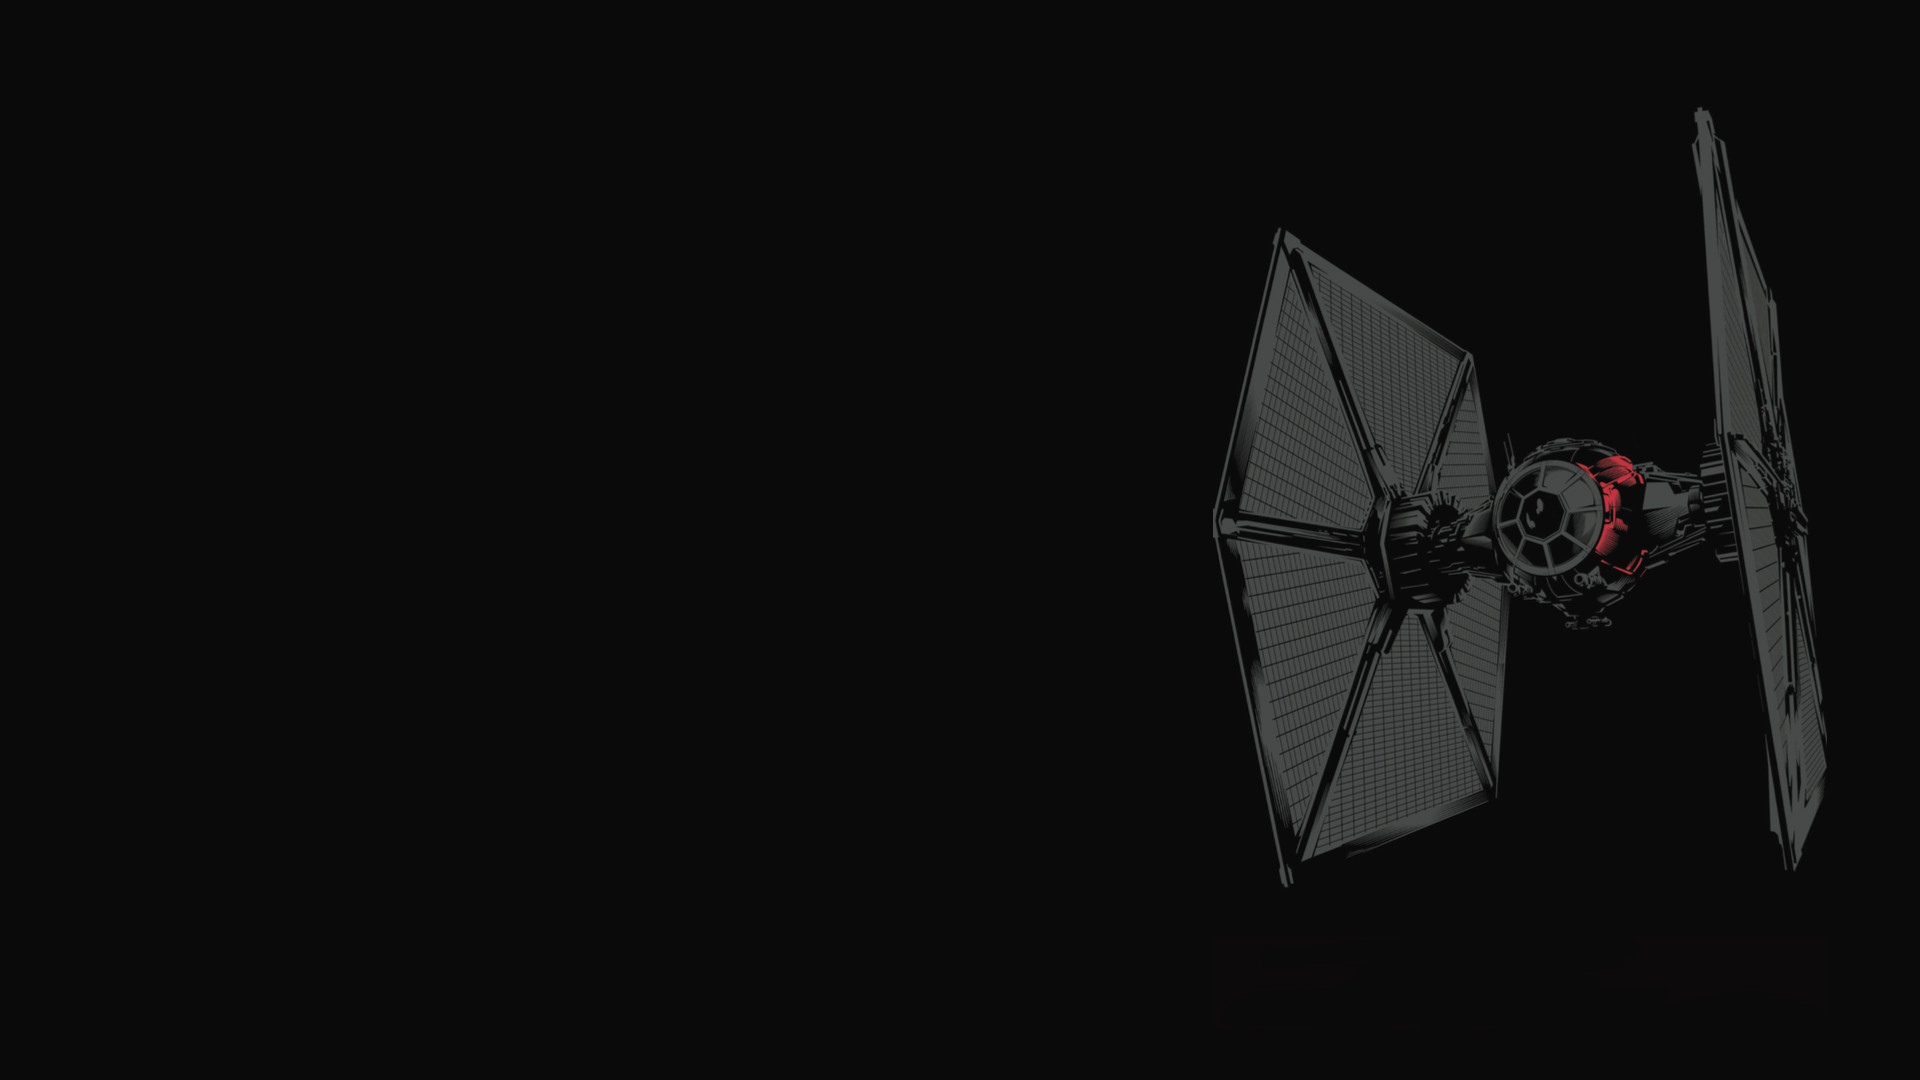 1920x1080 I made a wallpaper out of that TIE Fighter image from the toy leak. Enjoy!